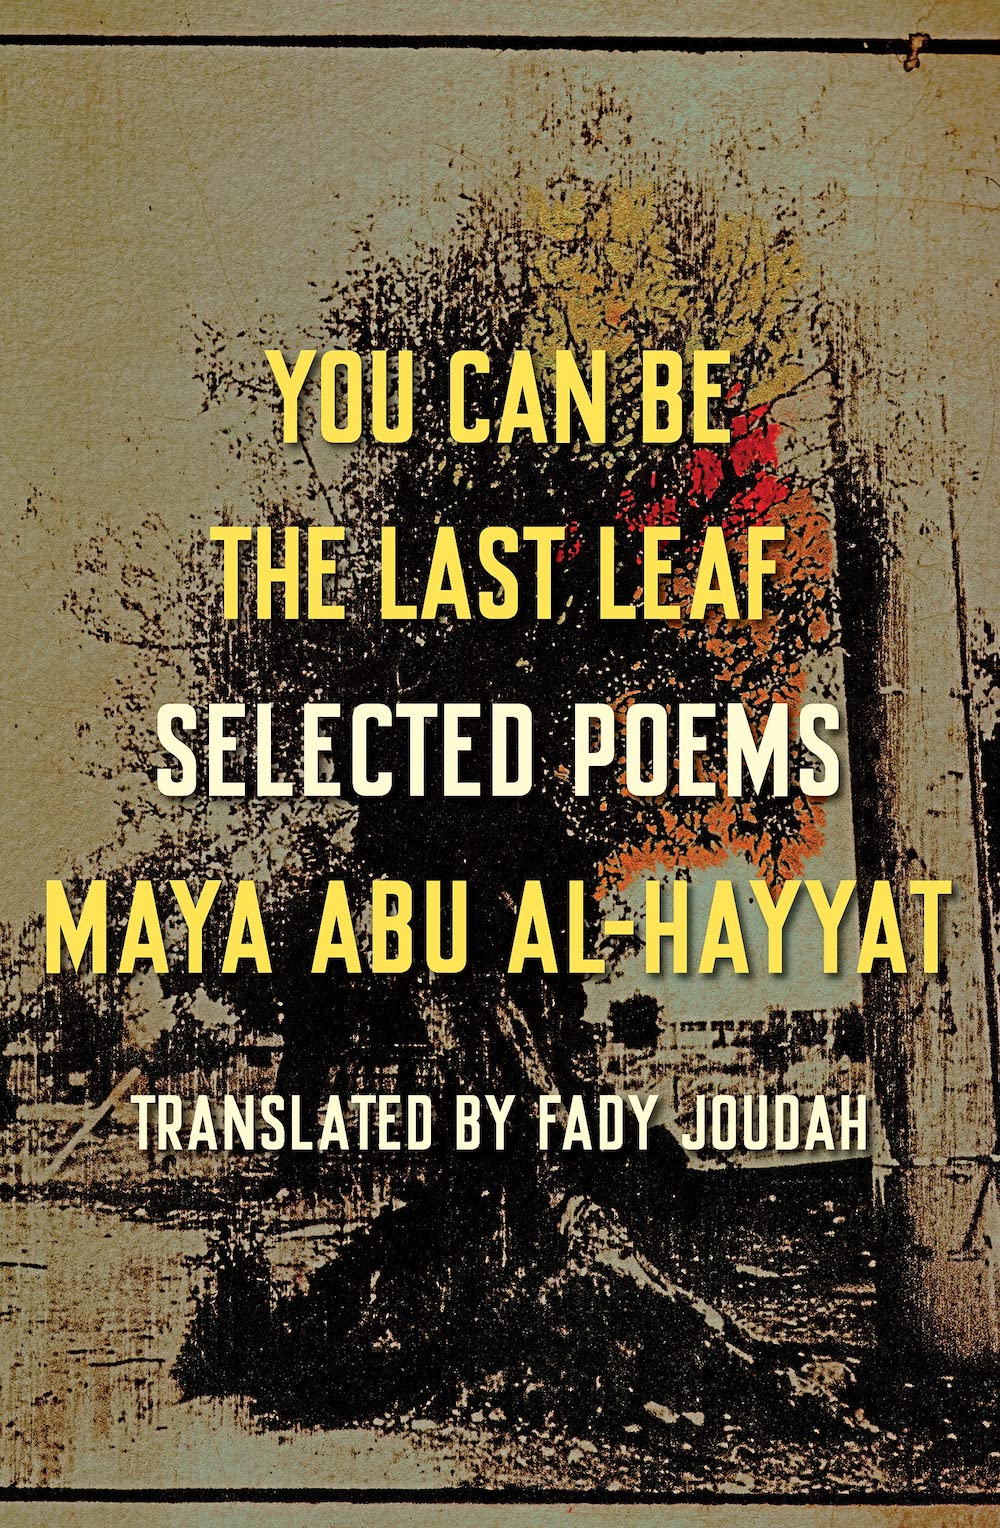 book cover for maya abu al hayyat you can be the last leaf poetry collection title imposed over astract background